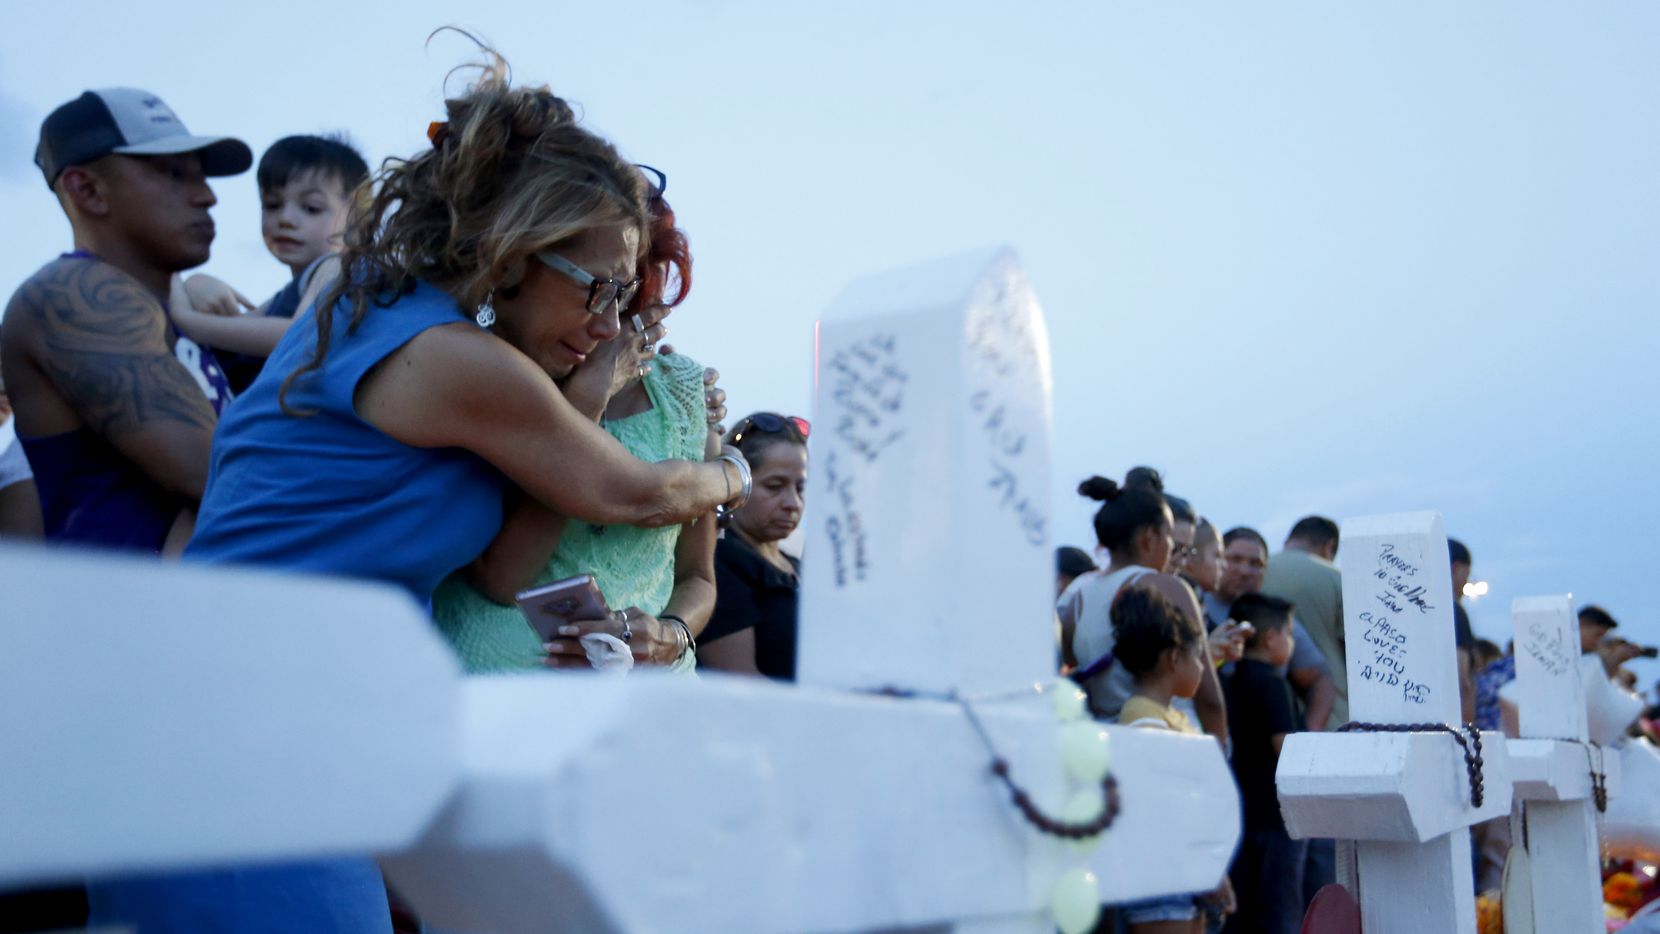 Rebecca Najera hugs Elsa Escobar on Aug. 5 as they joined other mourners gathered beside crosses representing the victims of a shooting at a Walmart in El Paso.